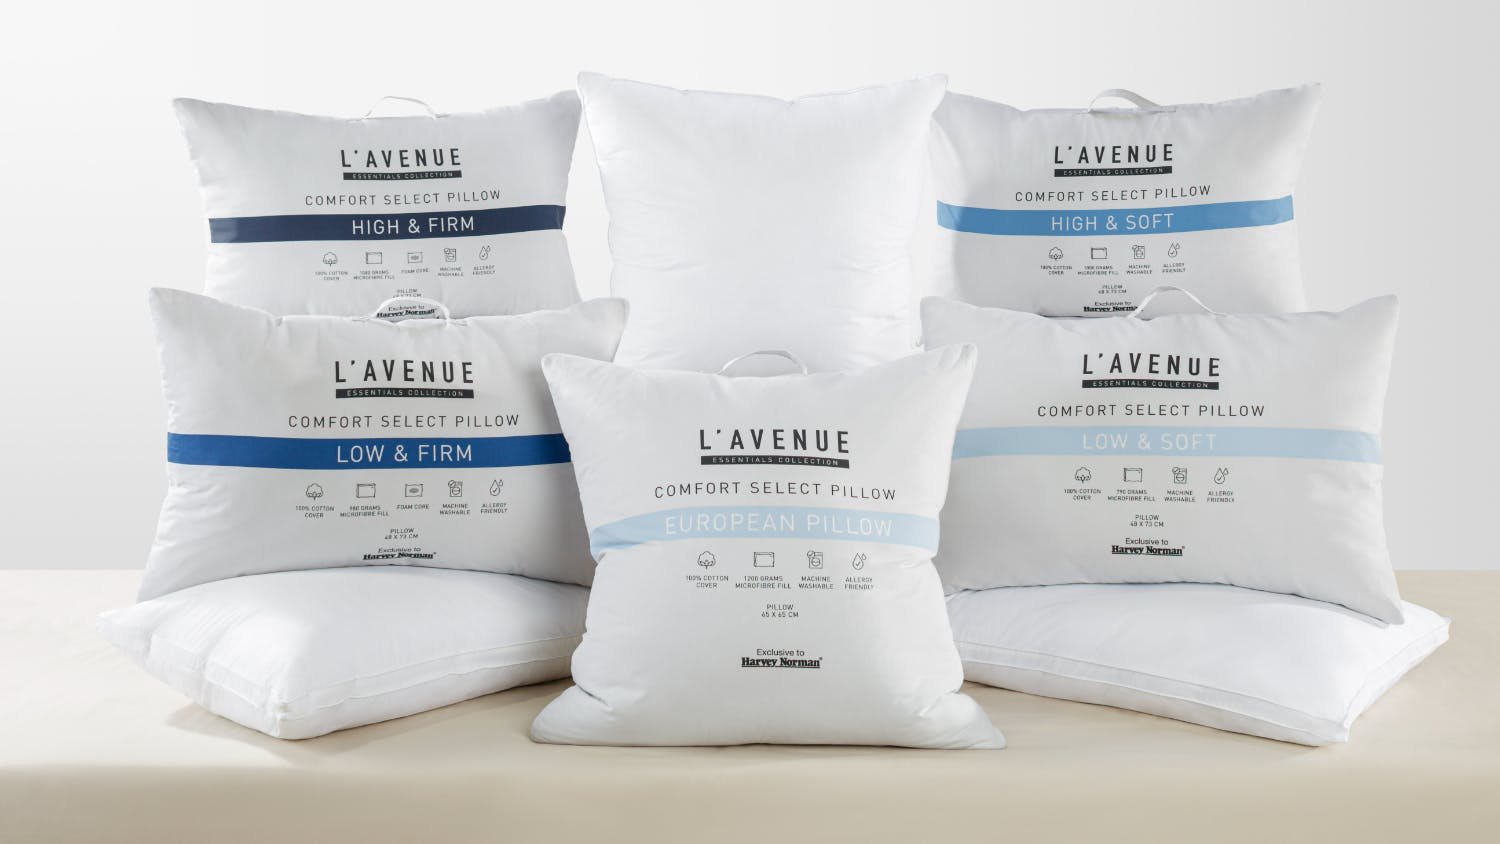 Comfort Select High/Firm Standard Pillow by L'Avenue